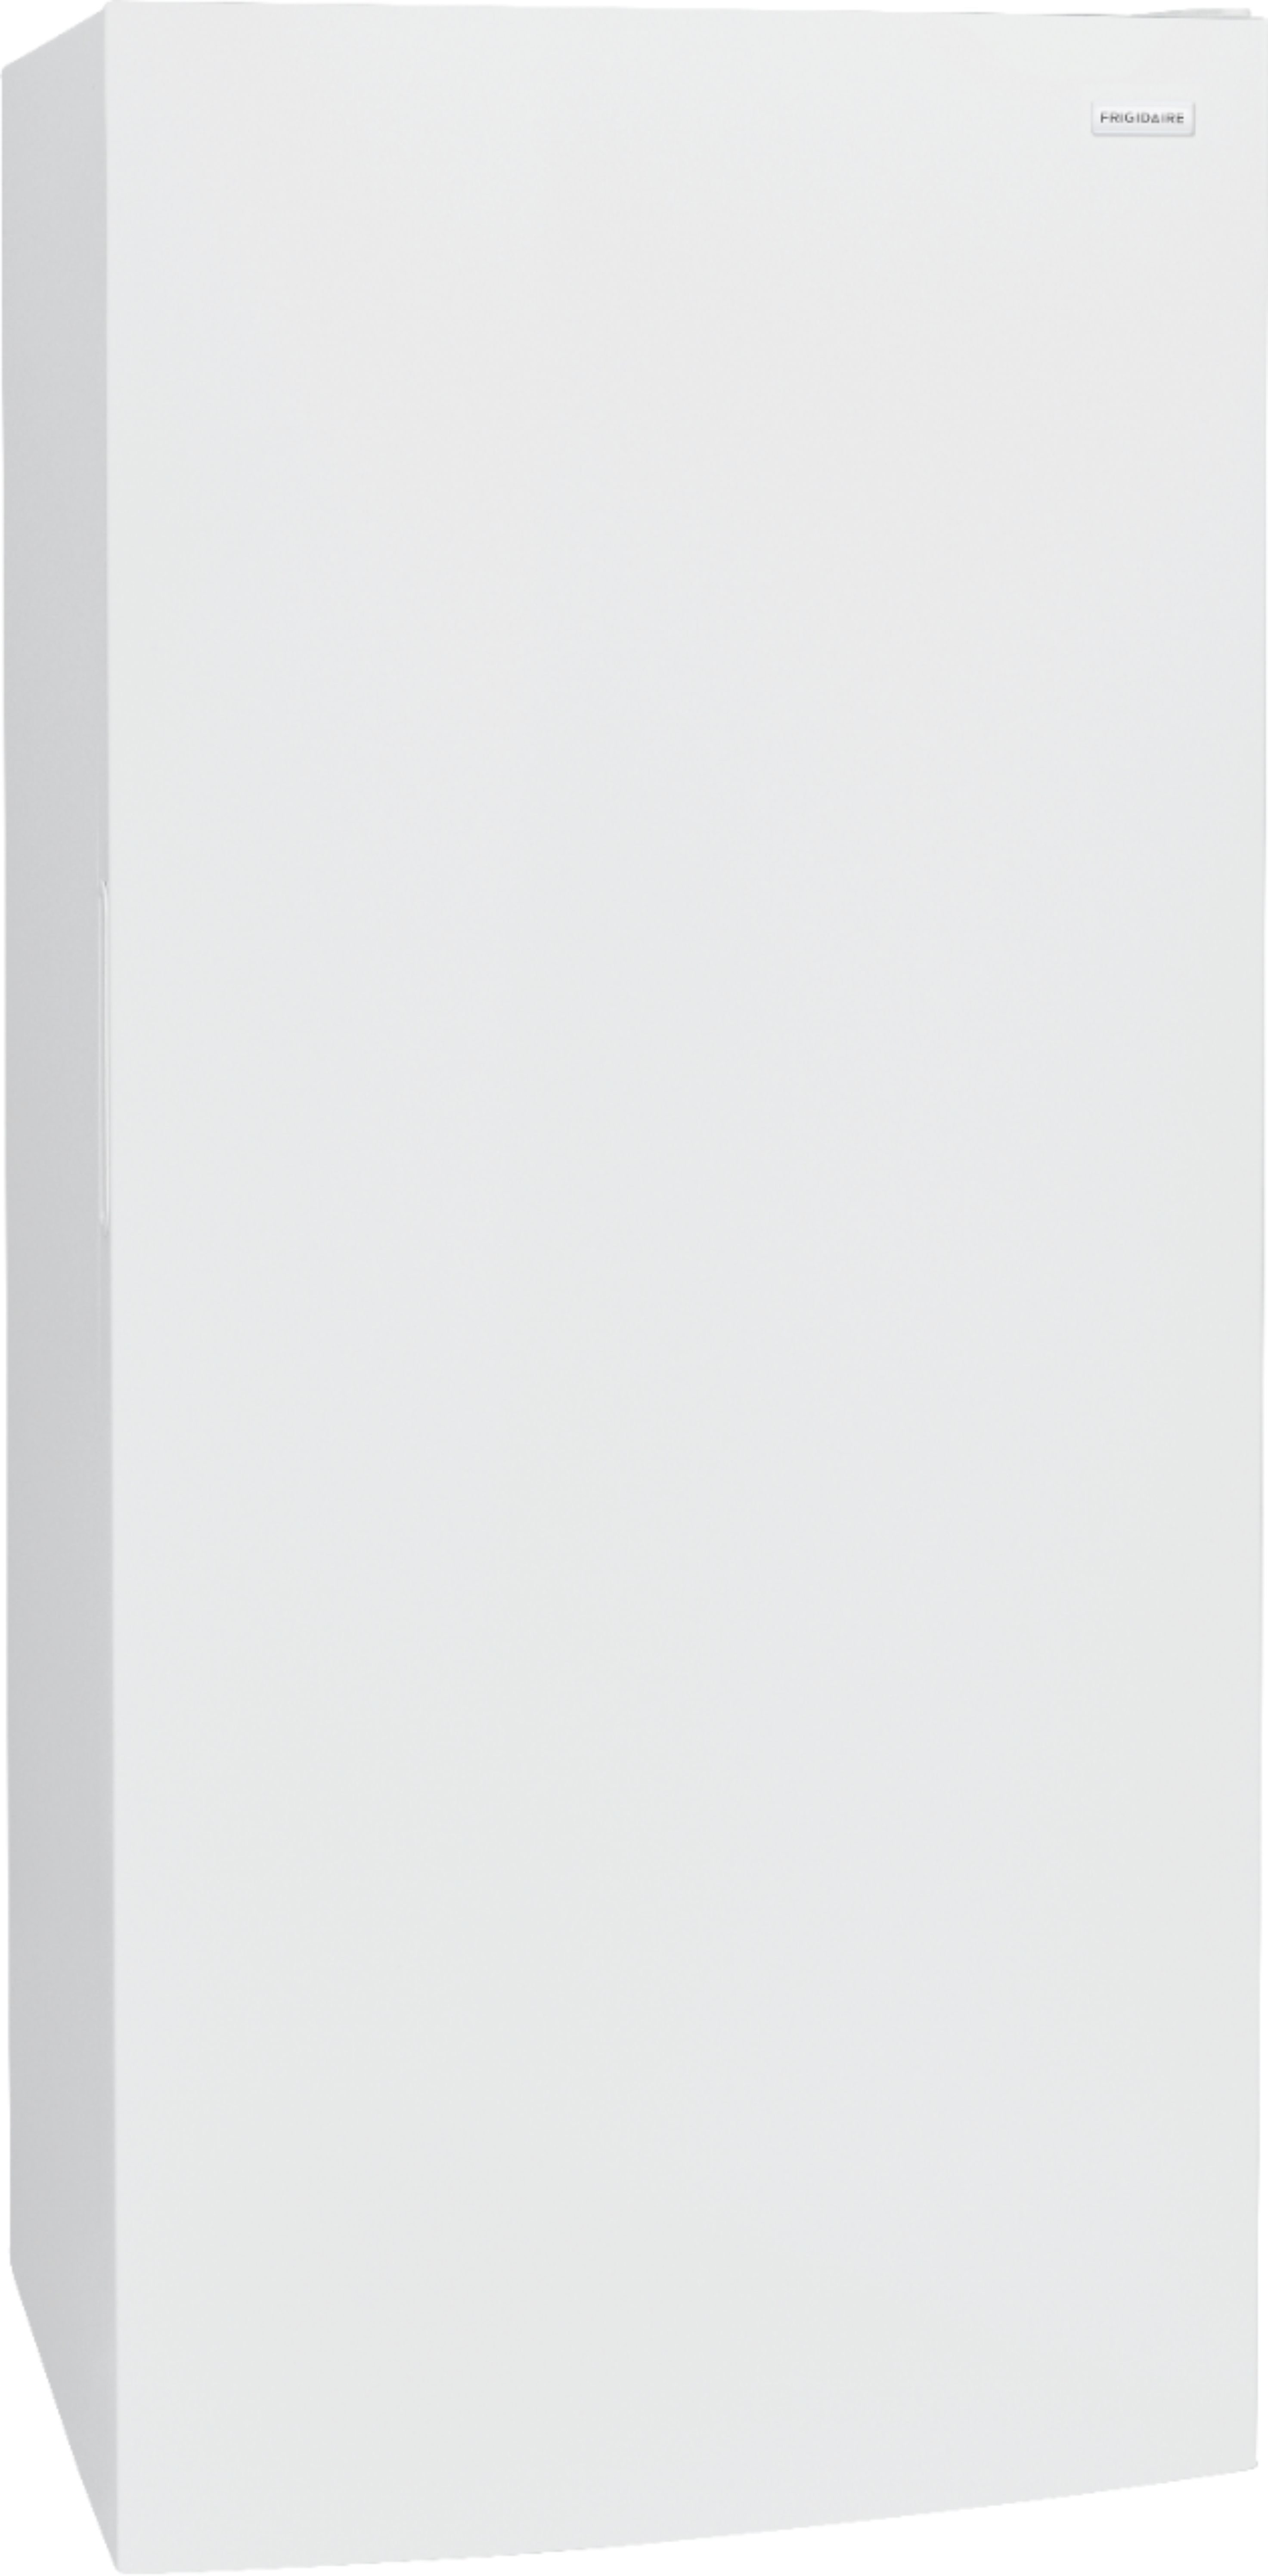 Angle View: Fisher & Paykel - ActiveSmart 7.8 Cu. Ft. Frost-Free Upright Freezer - Slate